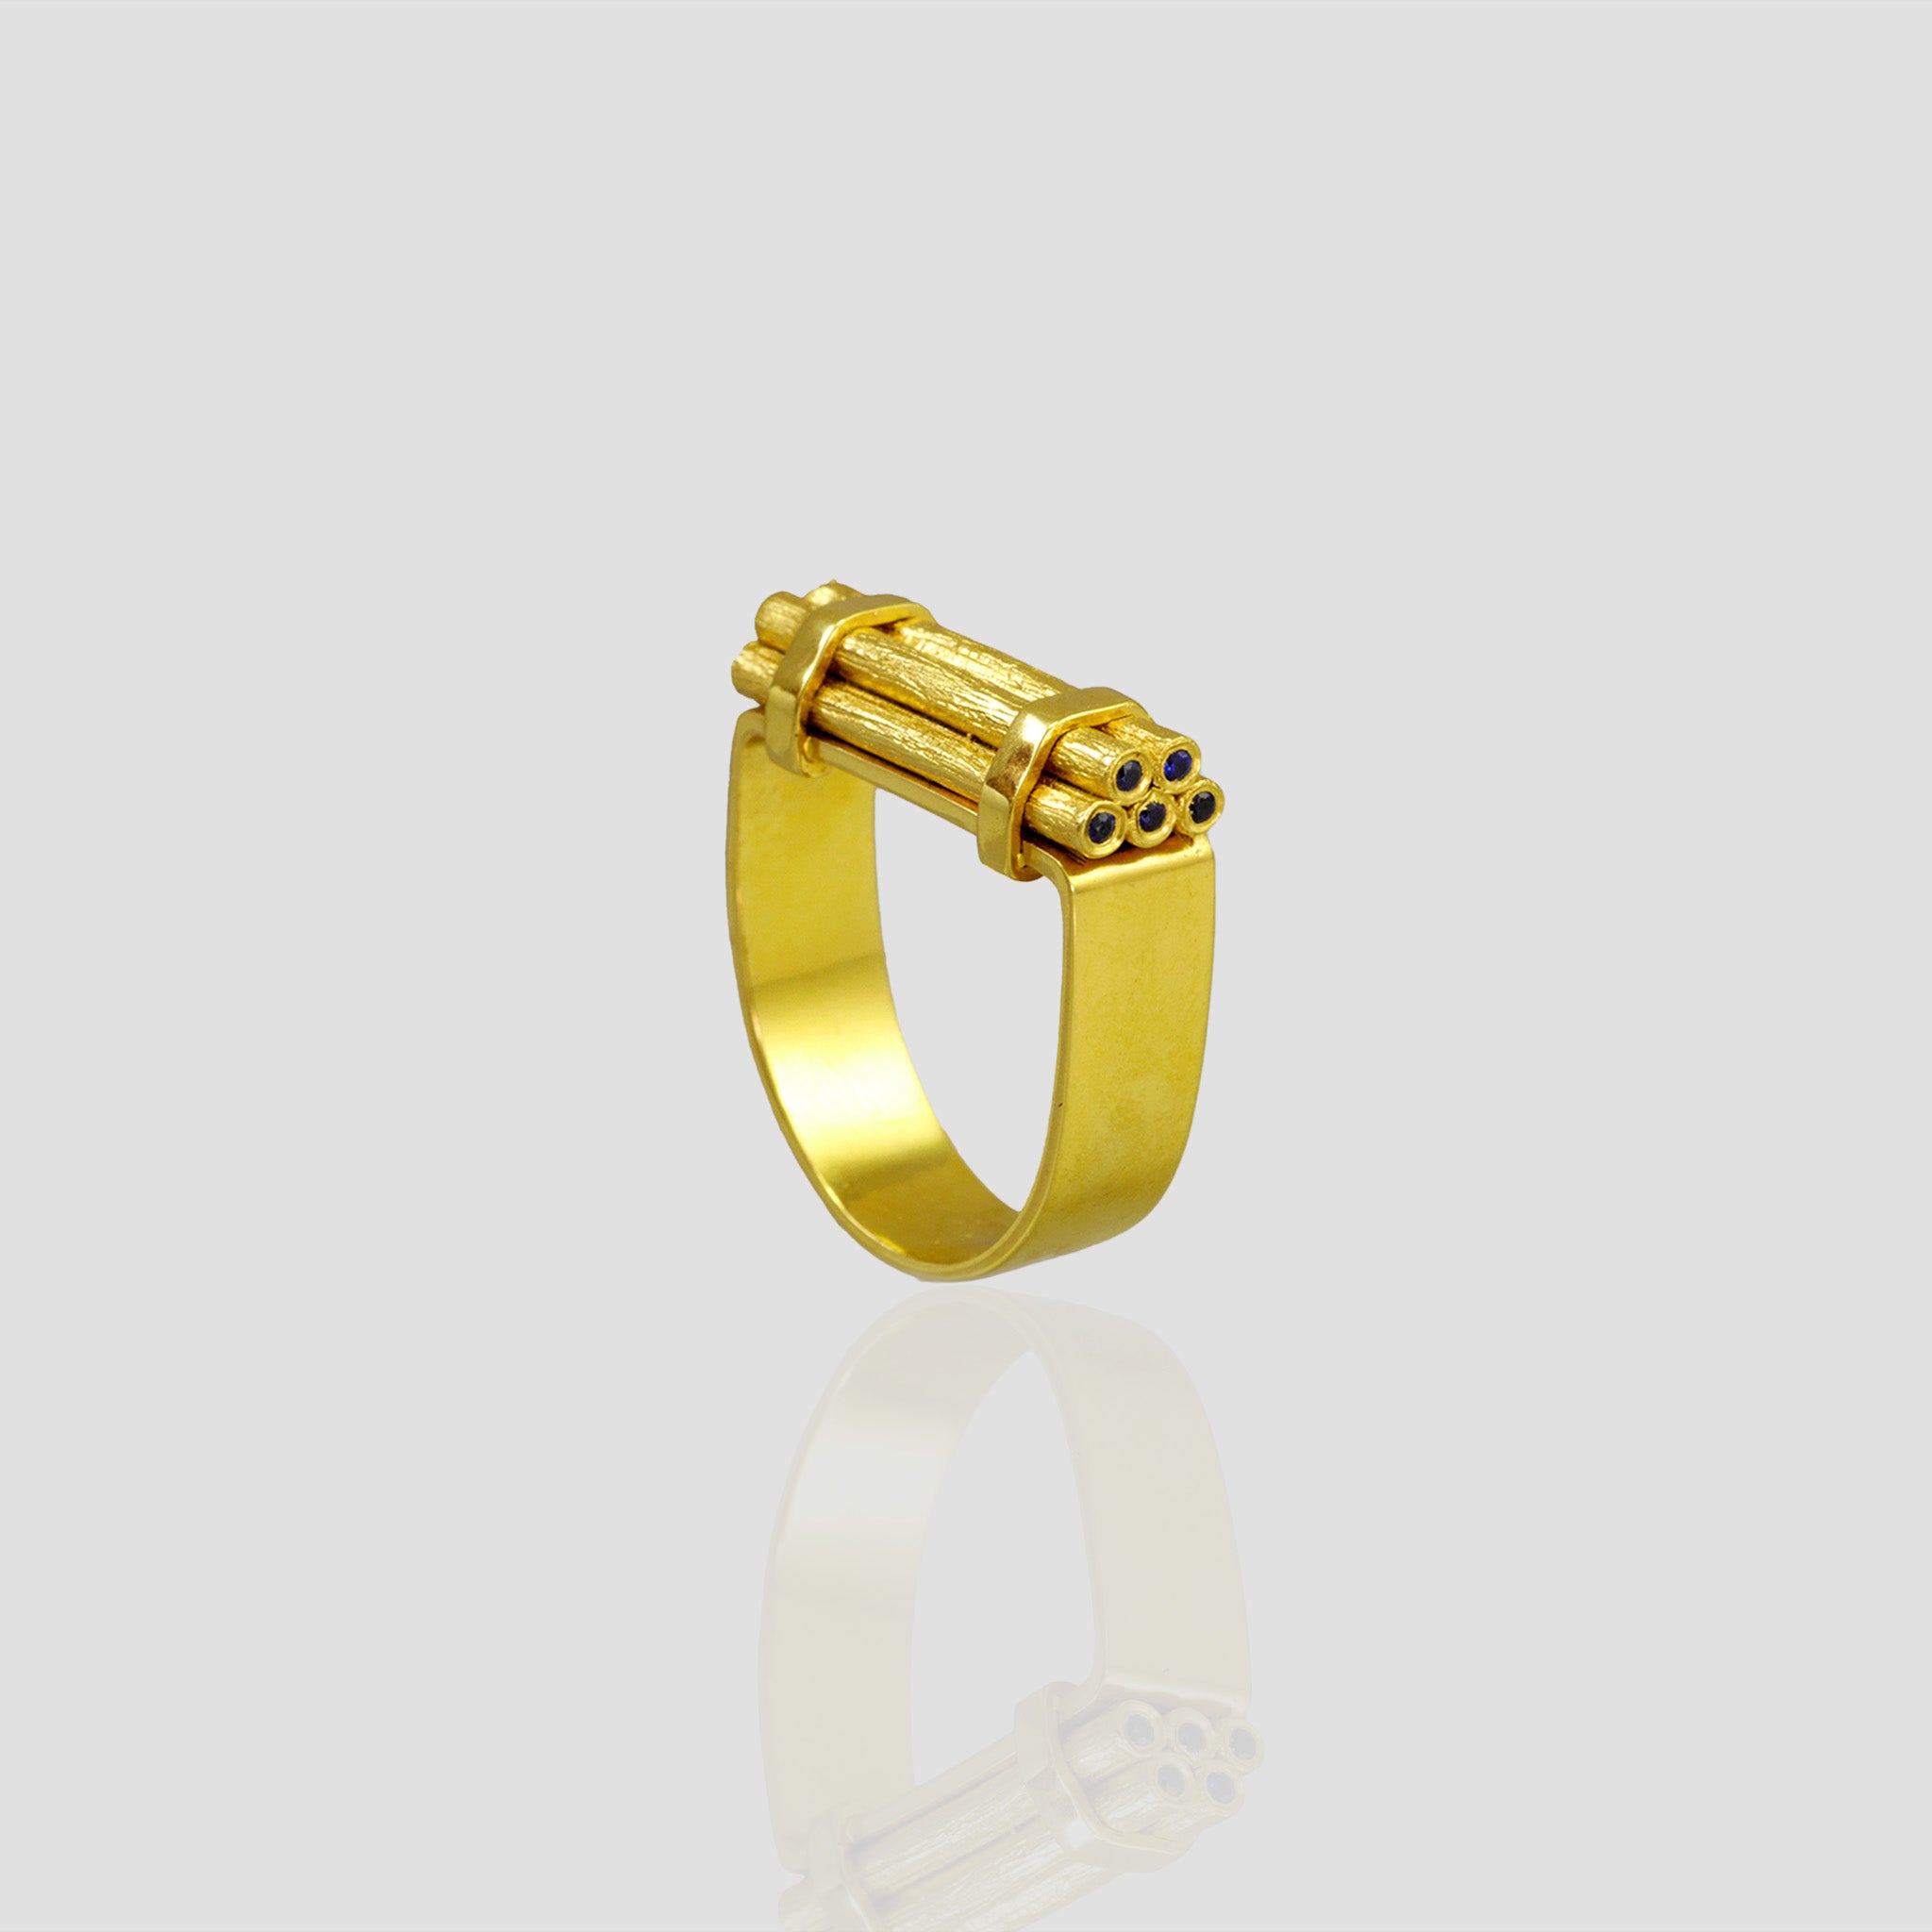 Handcrafted gold ring with stacked wood-inspired design, adorned with sparkling Sapphires for added color and radiance. Contemporary and comfortable statement piece.